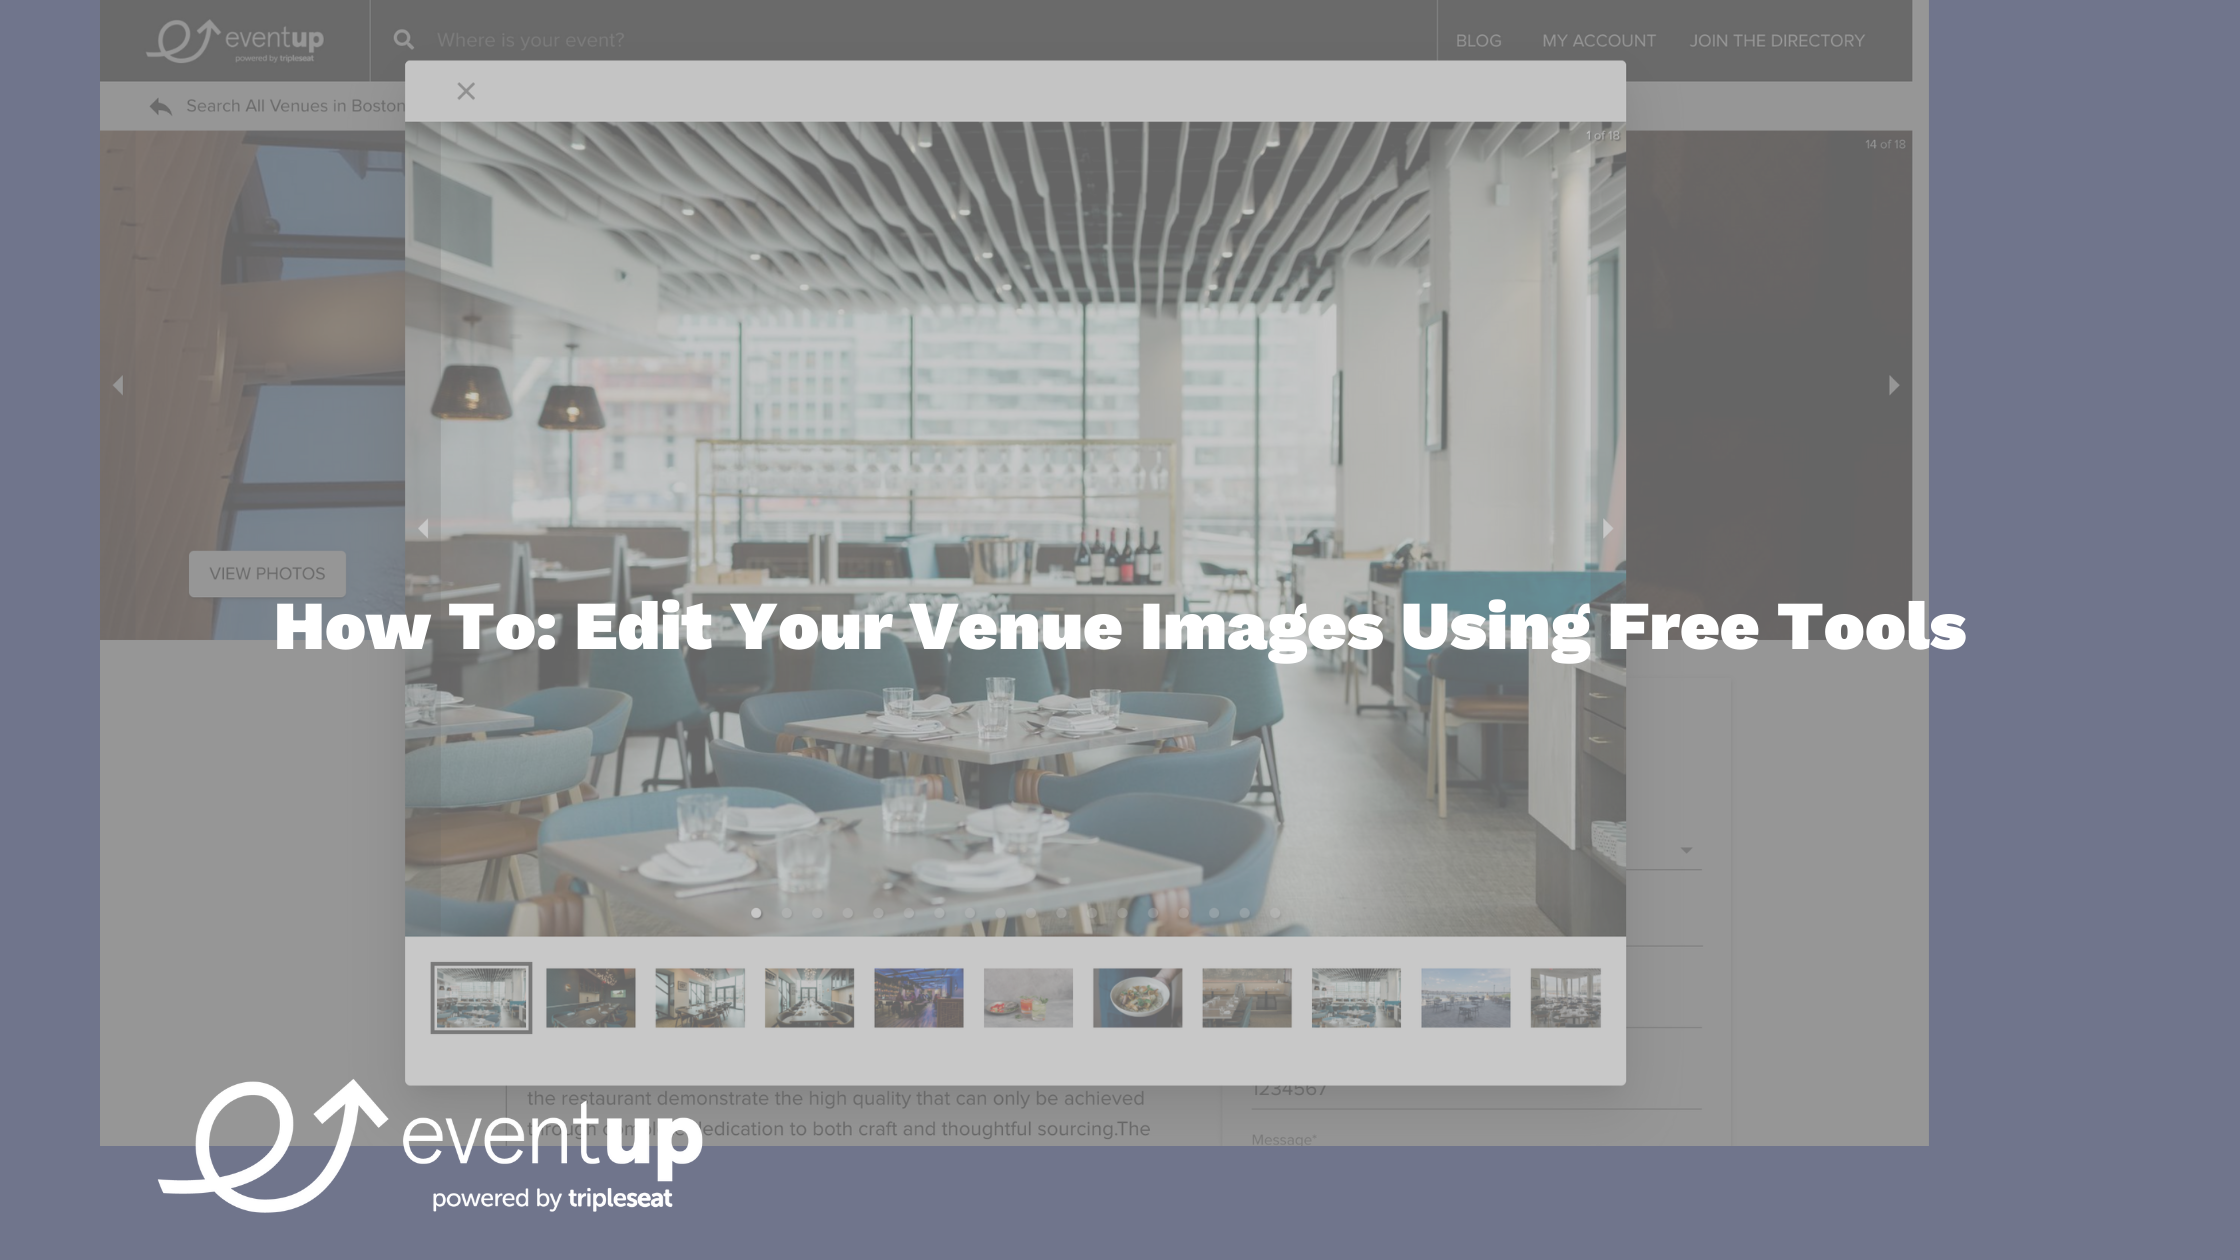 How To: Edit Your Venue Images Using Free Tools